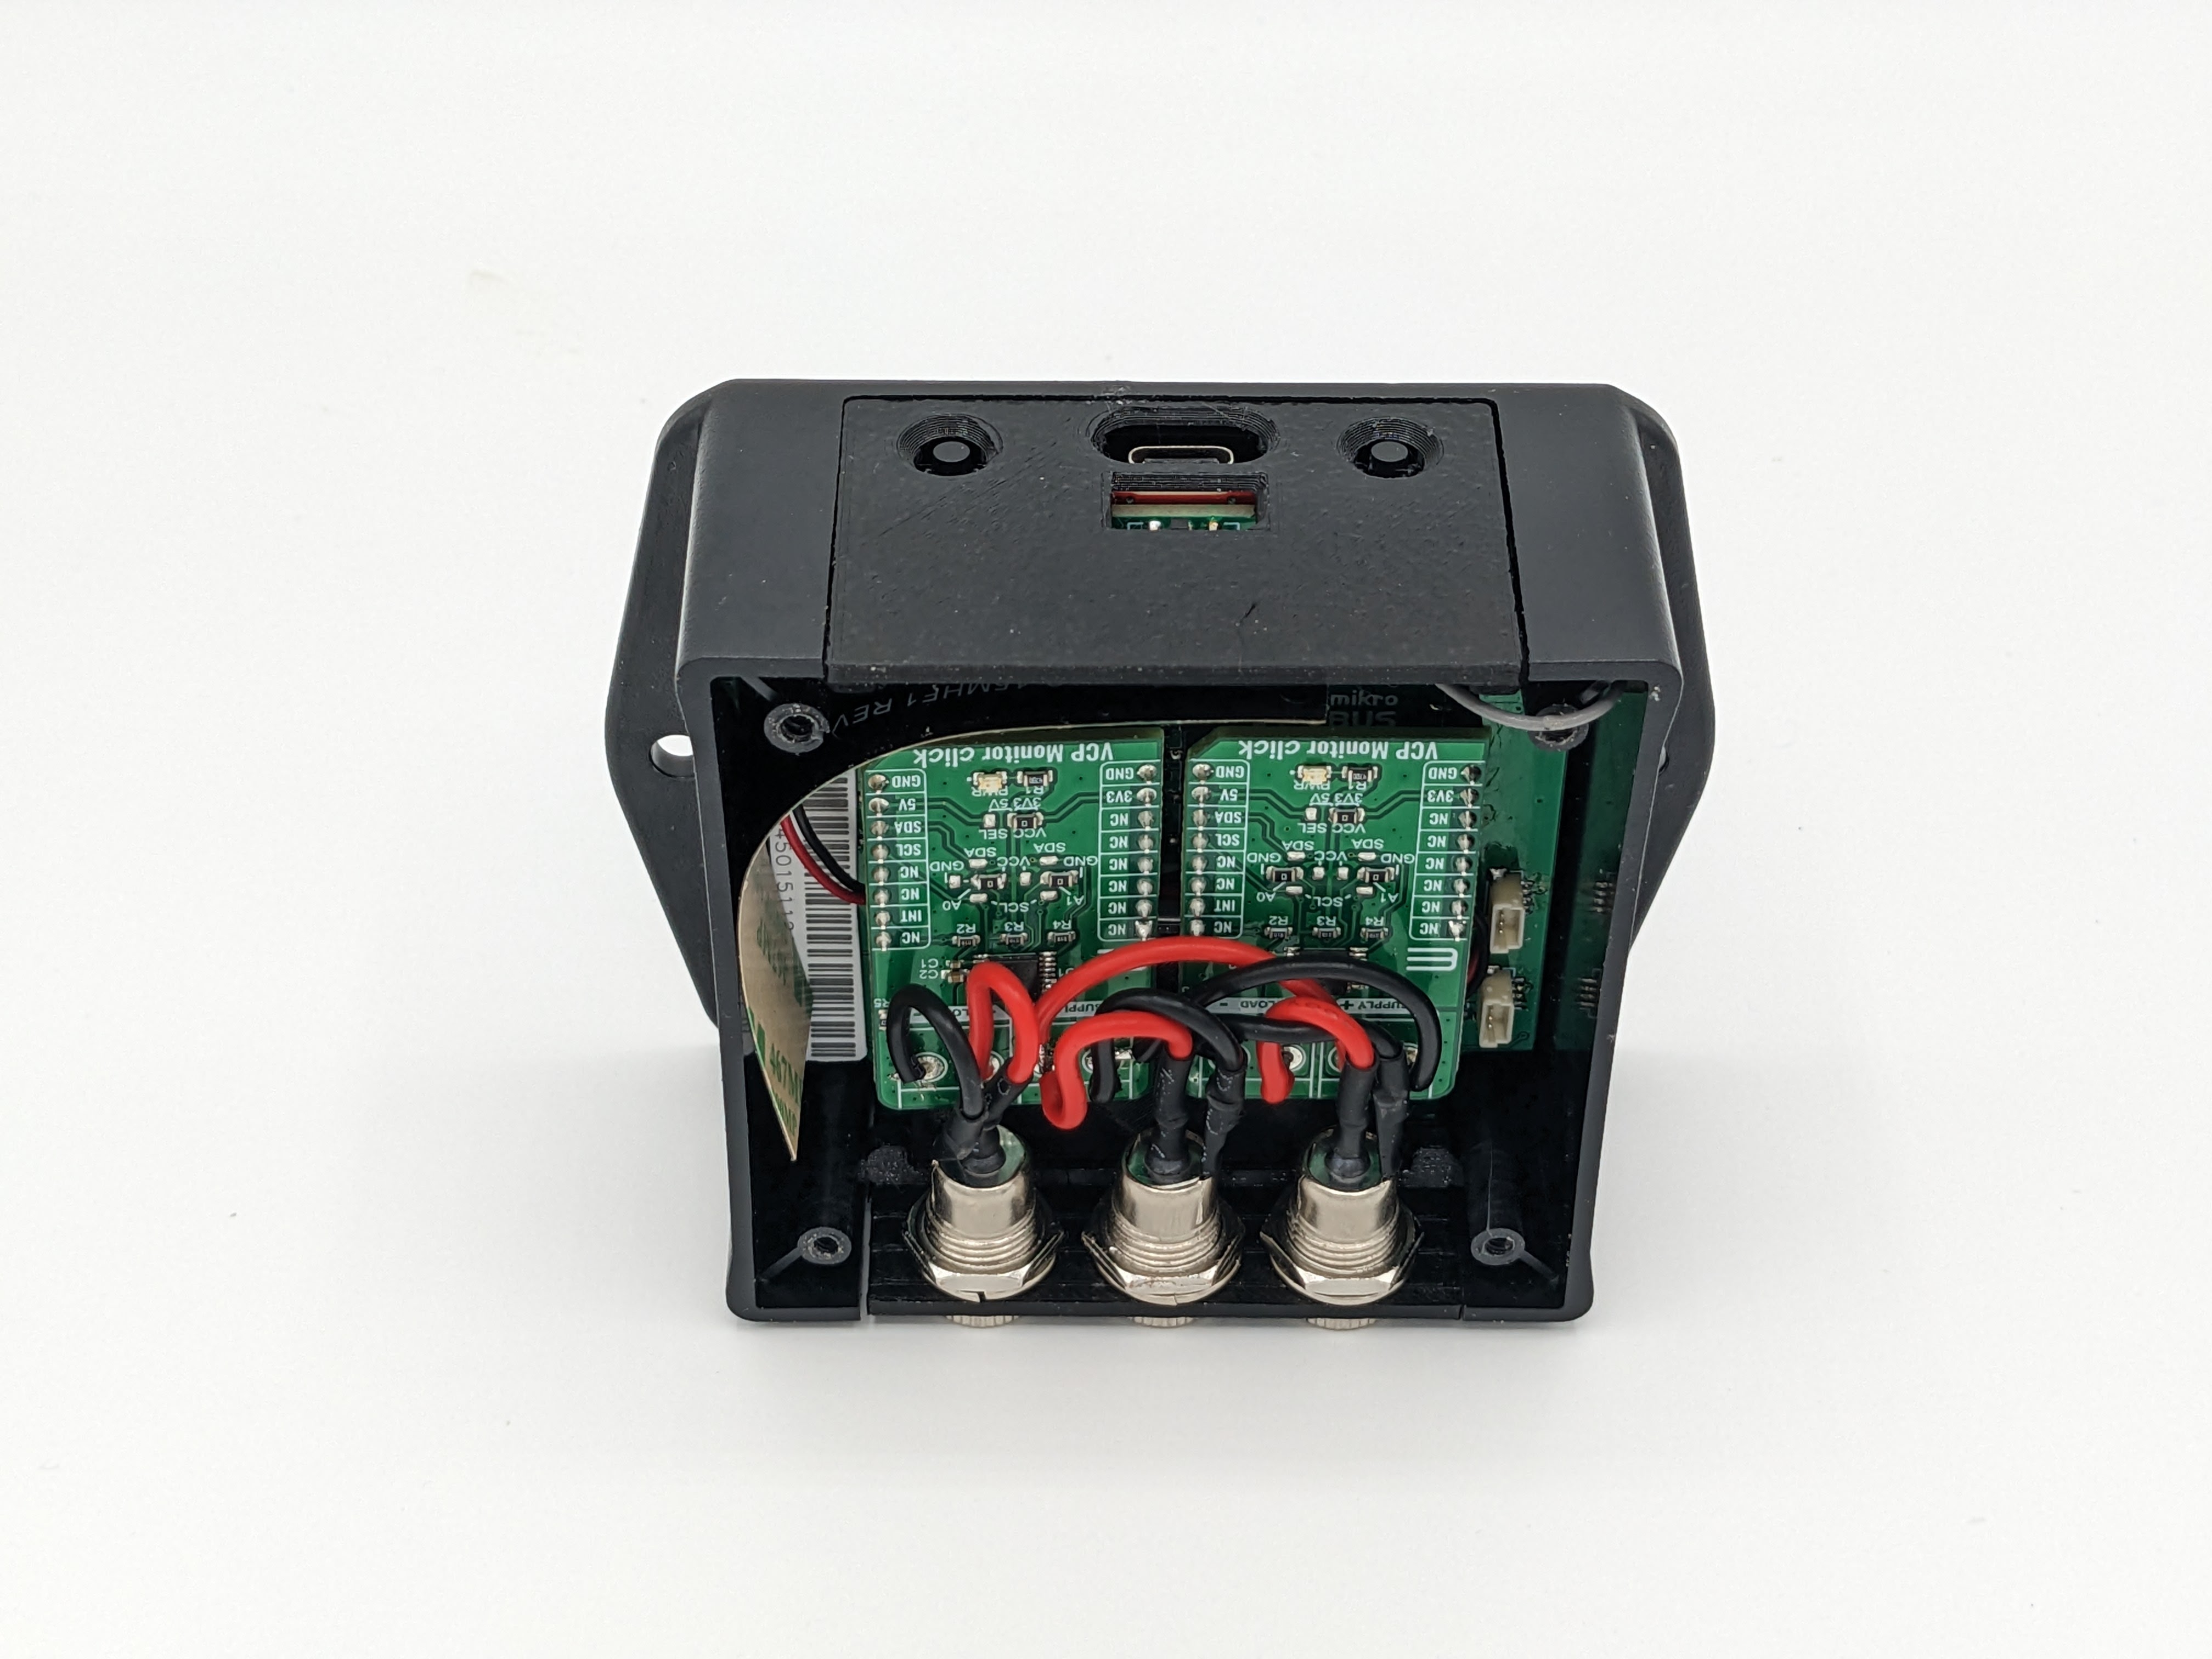 DC Power Monitor Top Open Standing